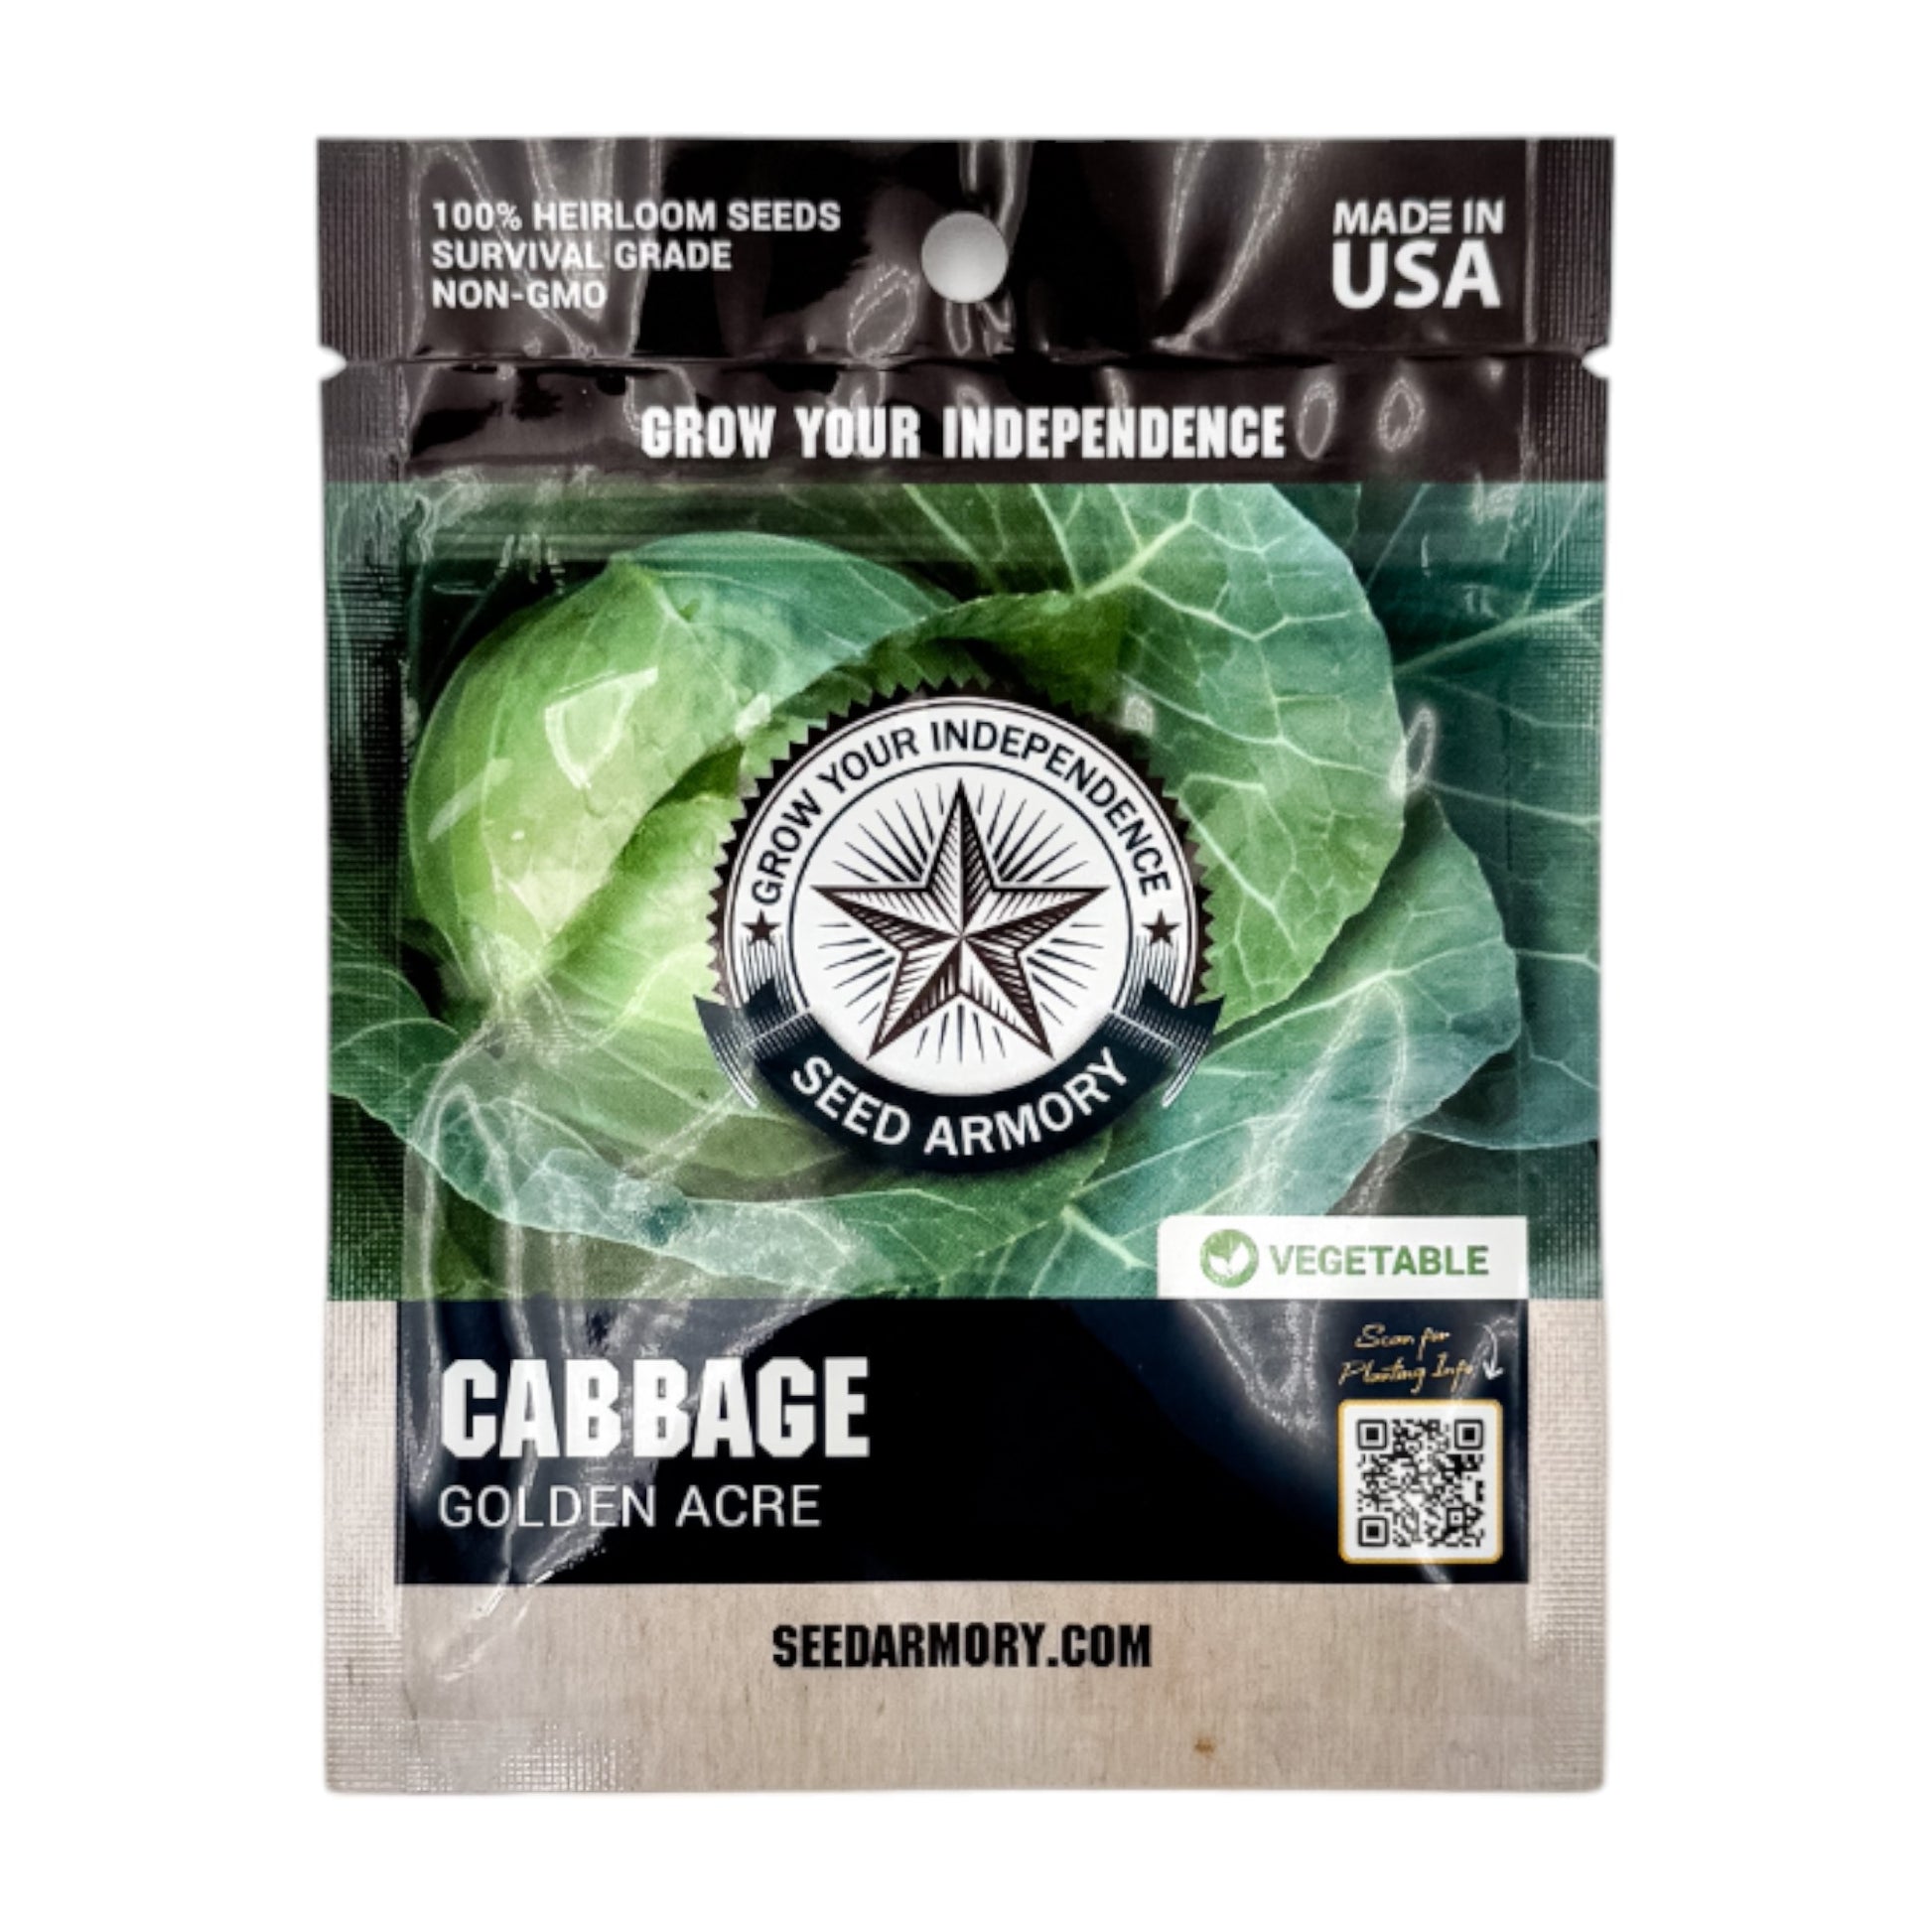 Golden Acre cabbage seed packet with visible label